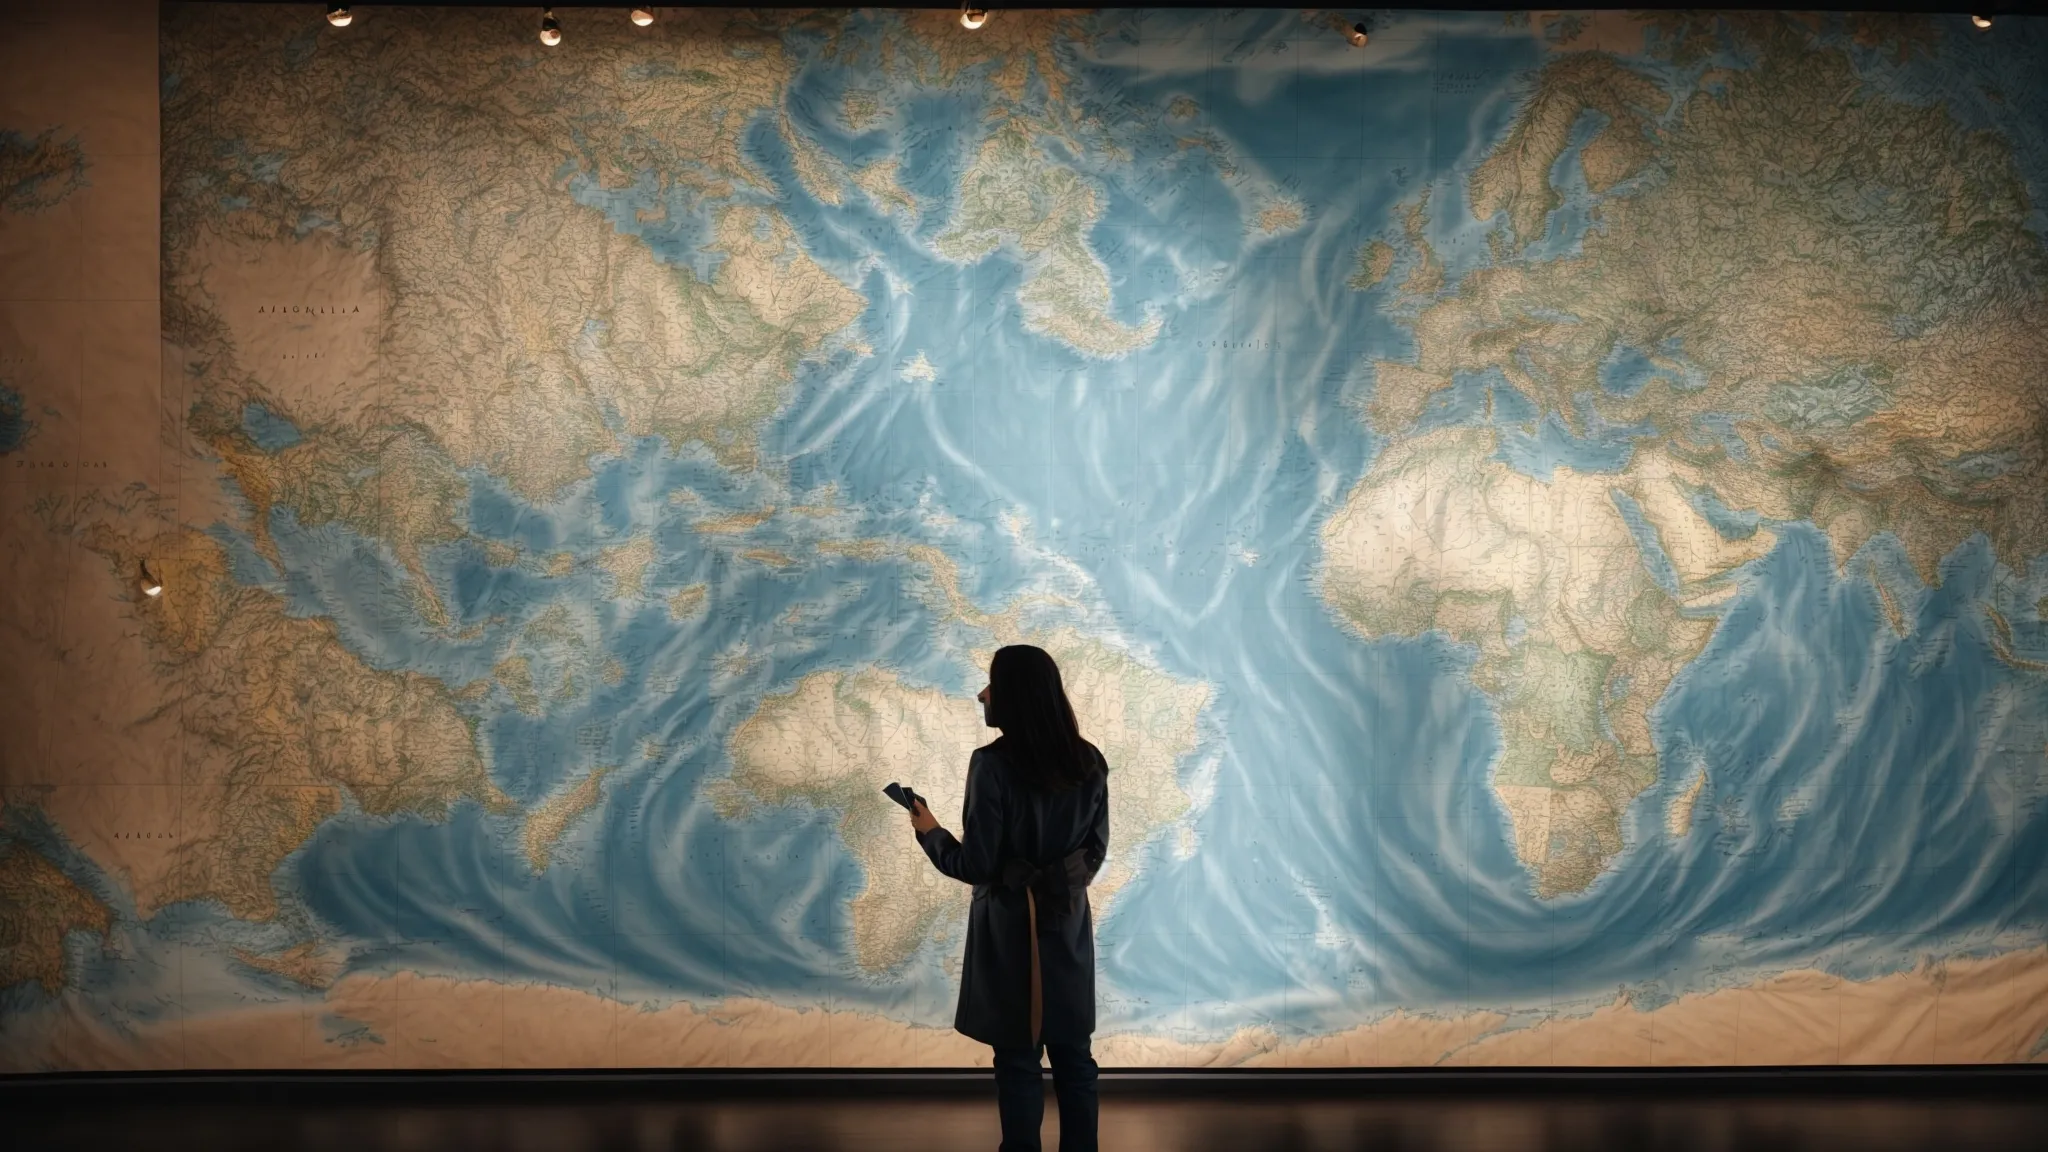 a person standing before a large interactive world map, touching points that are lighting up to symbolize different global regions.